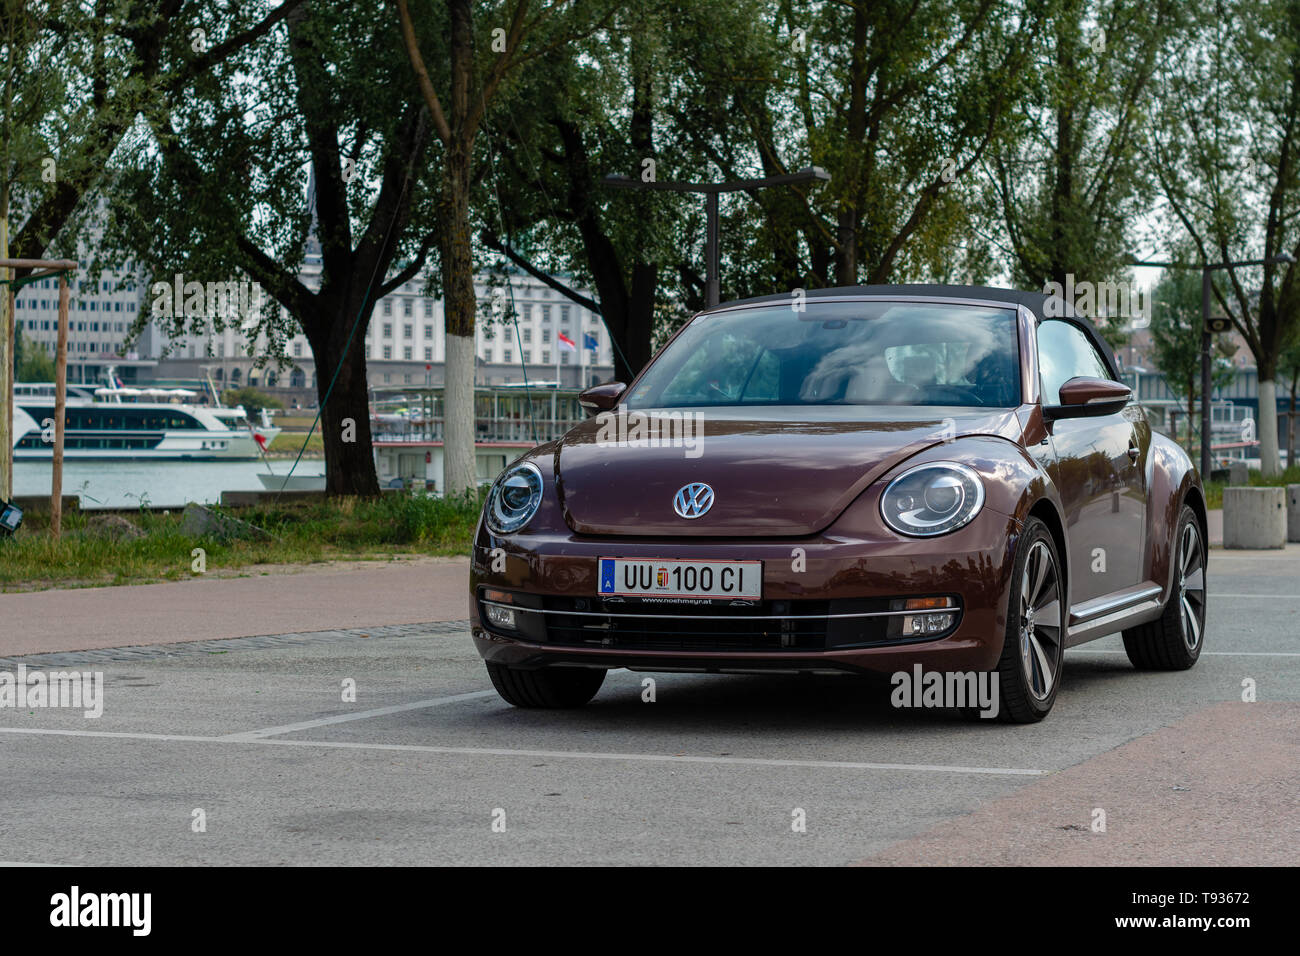 LINZ, AUSTRIA - AUGUST 02, 2018:   Side View Of Brown Volkswagen New Beetle Cabriolet Car Parked In Street. Stock Photo